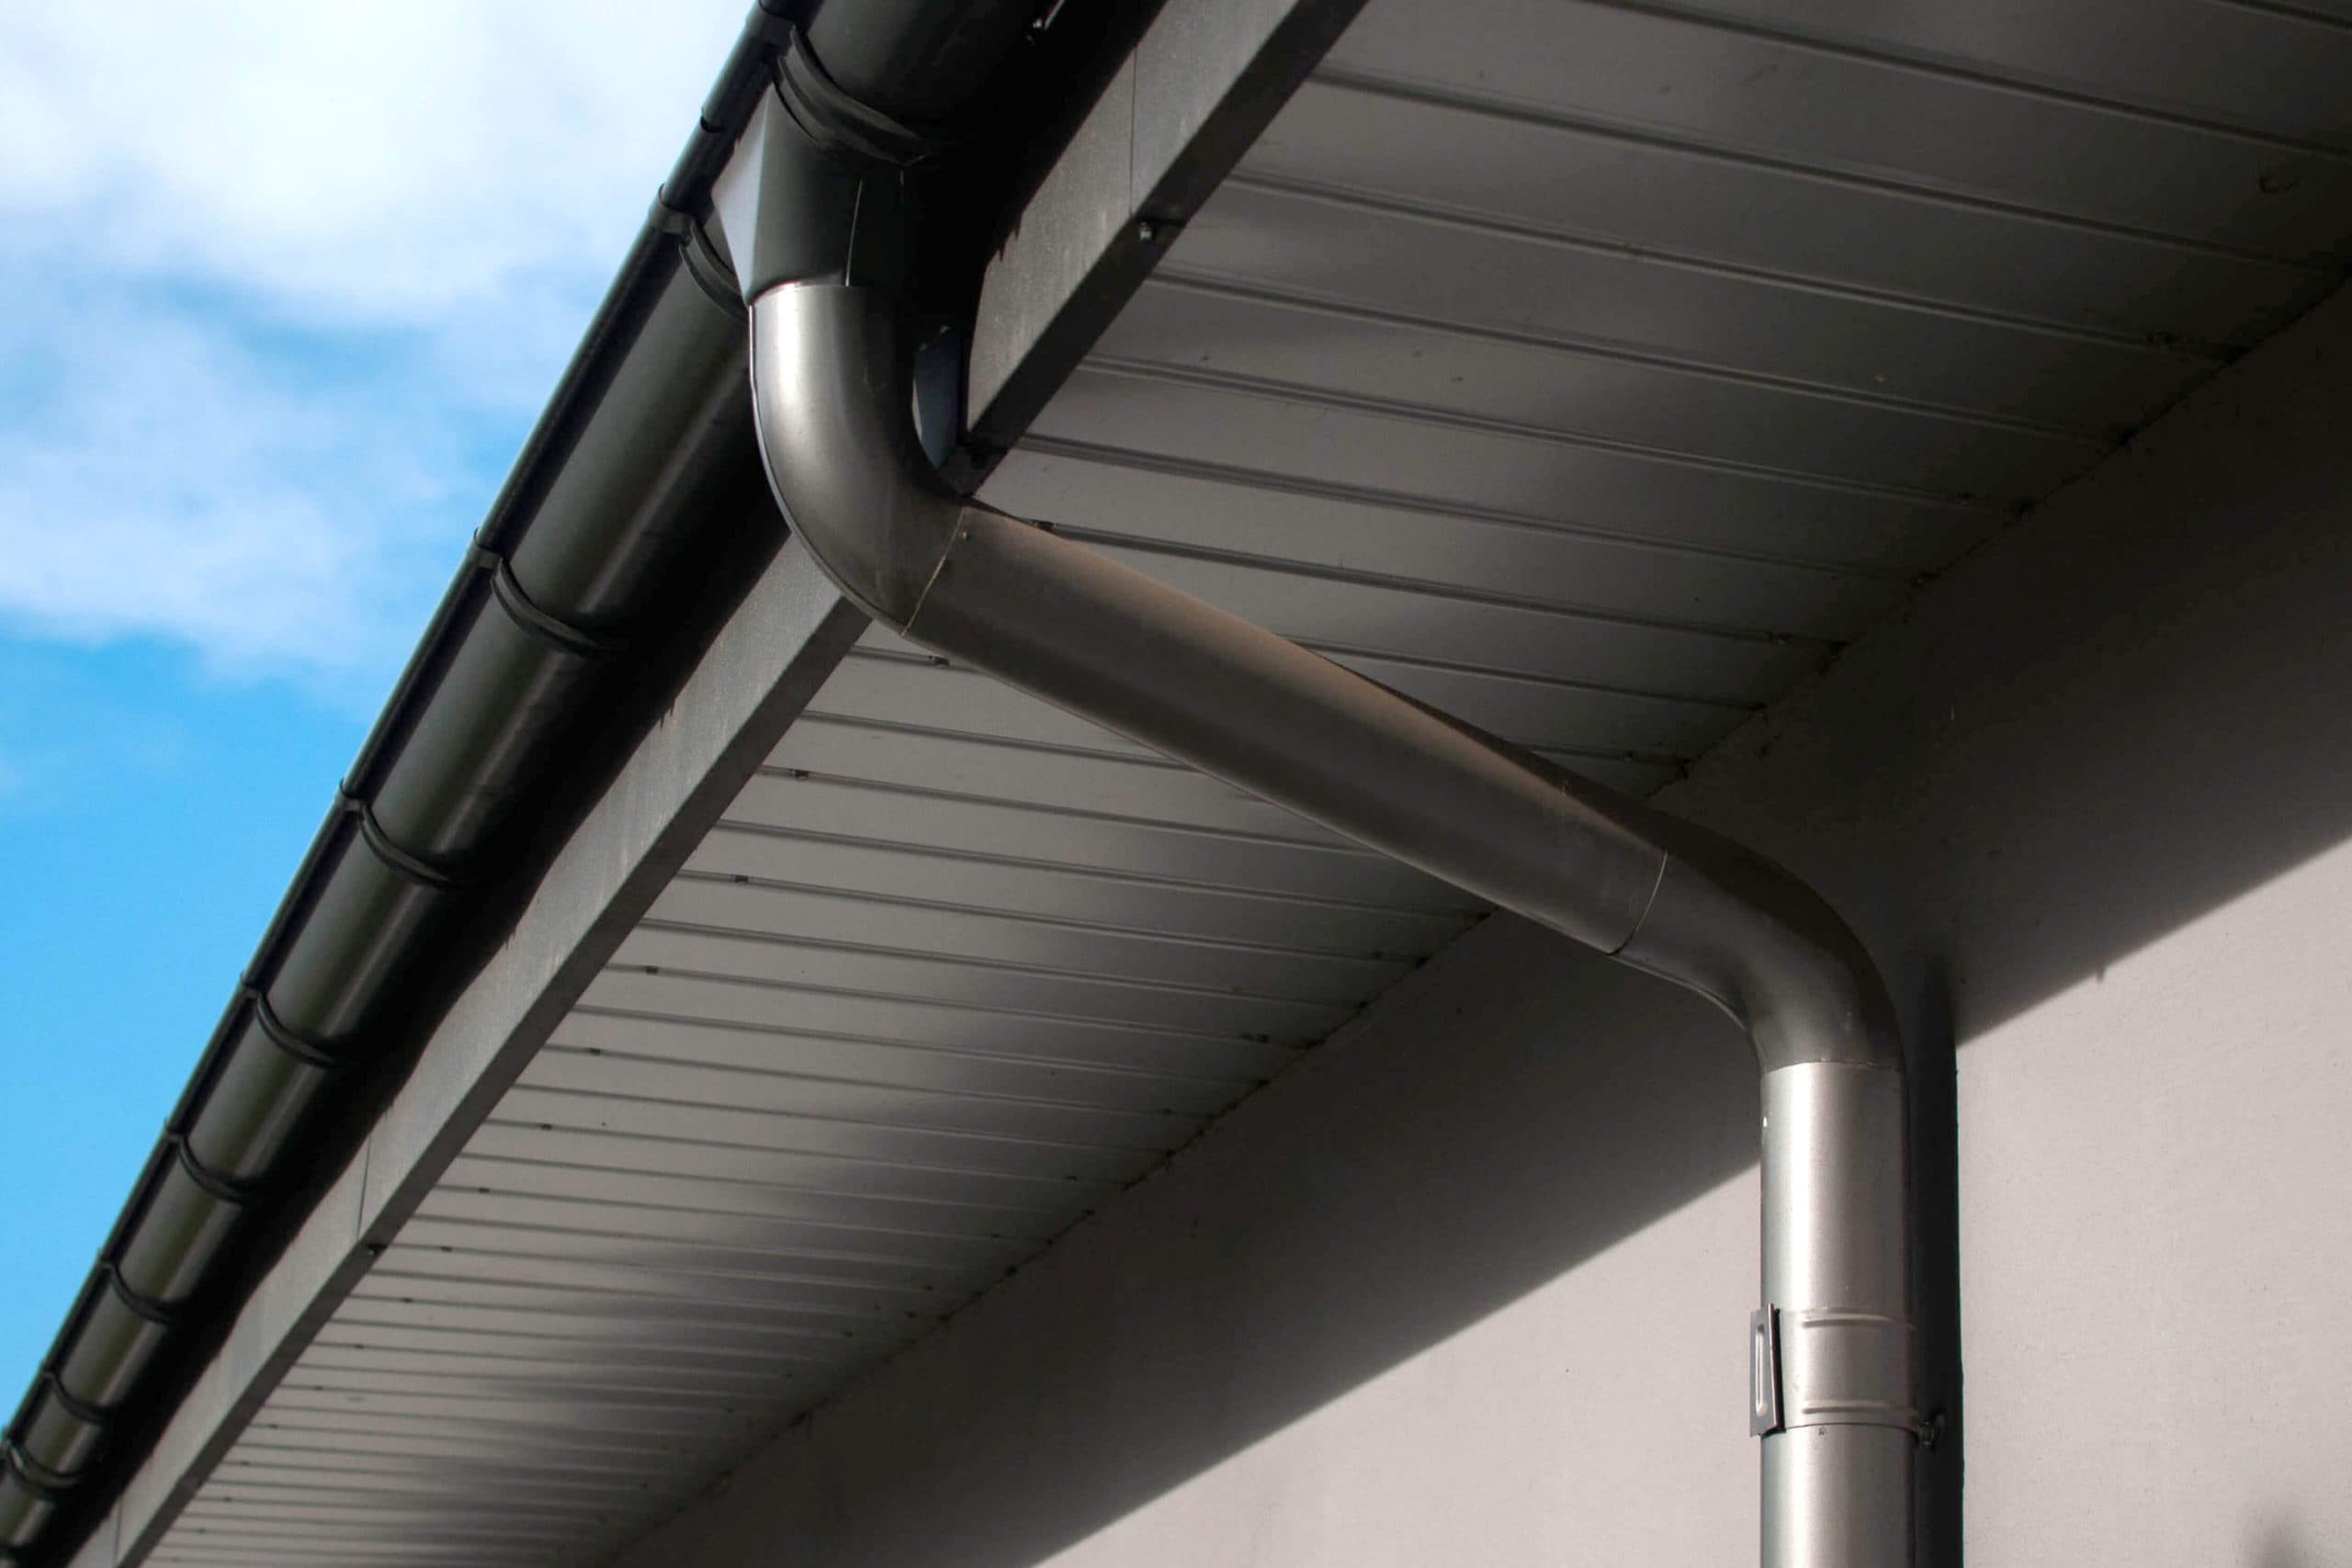 Reliable and affordable Galvanized gutters installation in Knoxville